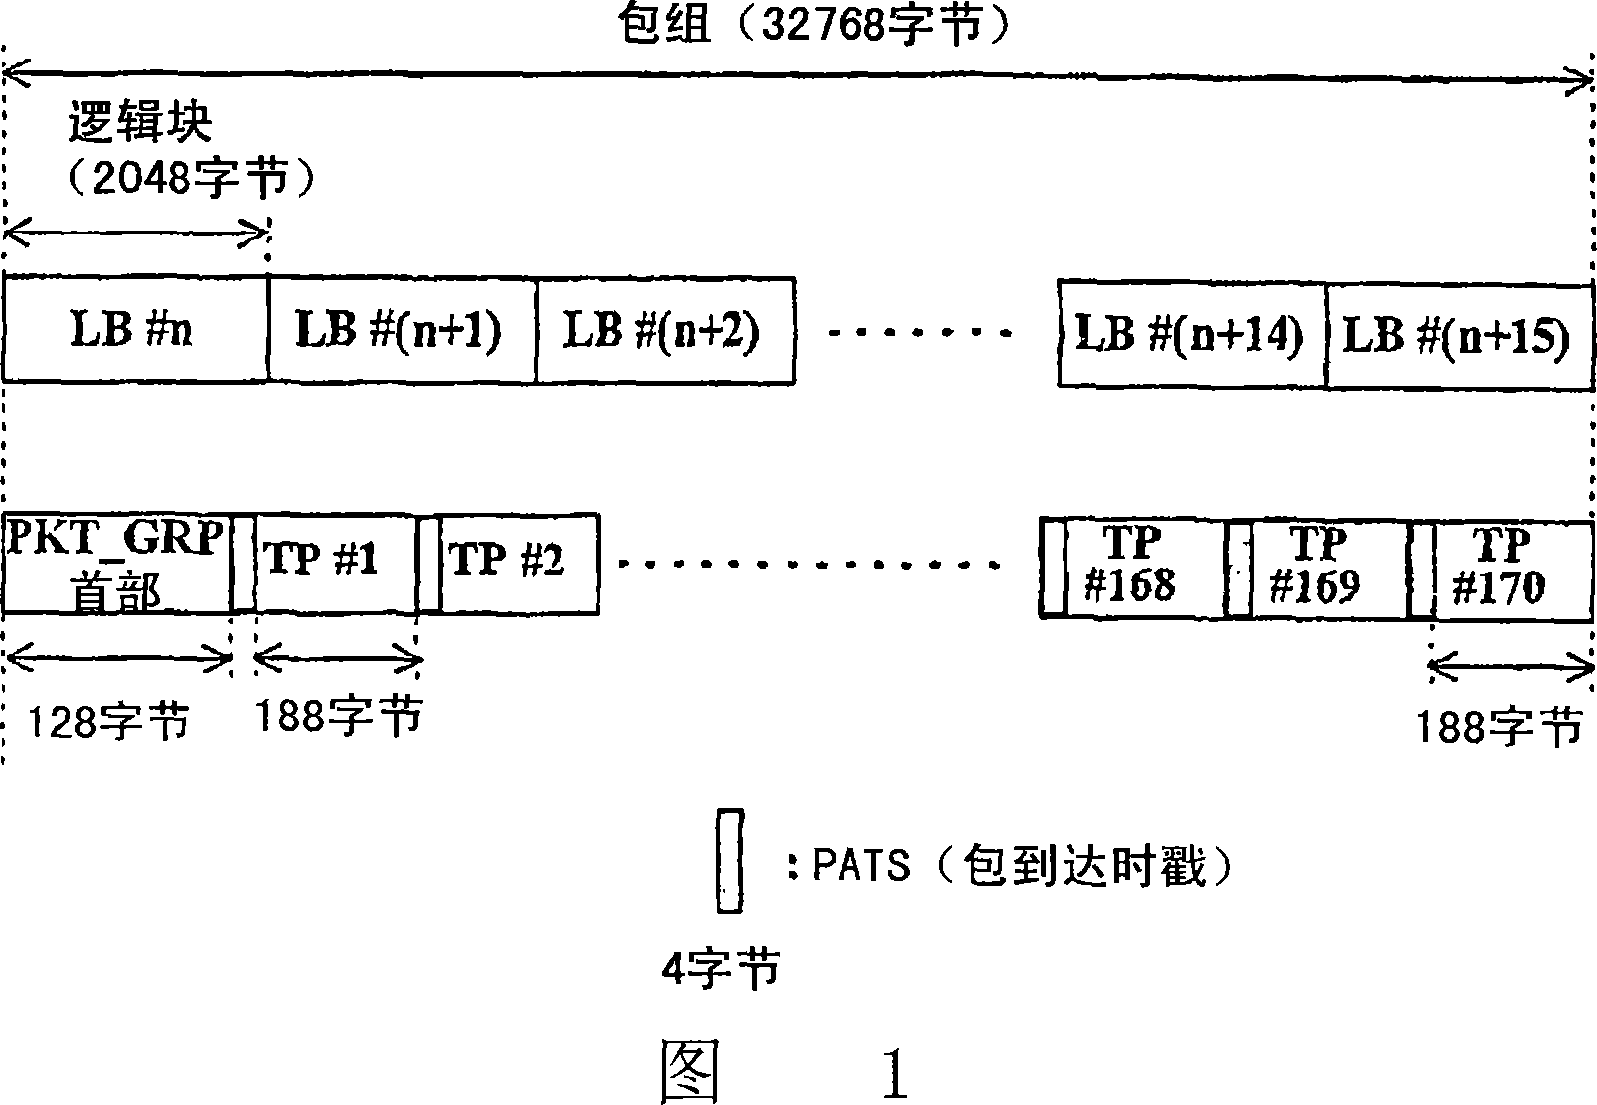 Method and apparatus for writing information on picture data sections in a data stream and for using the information